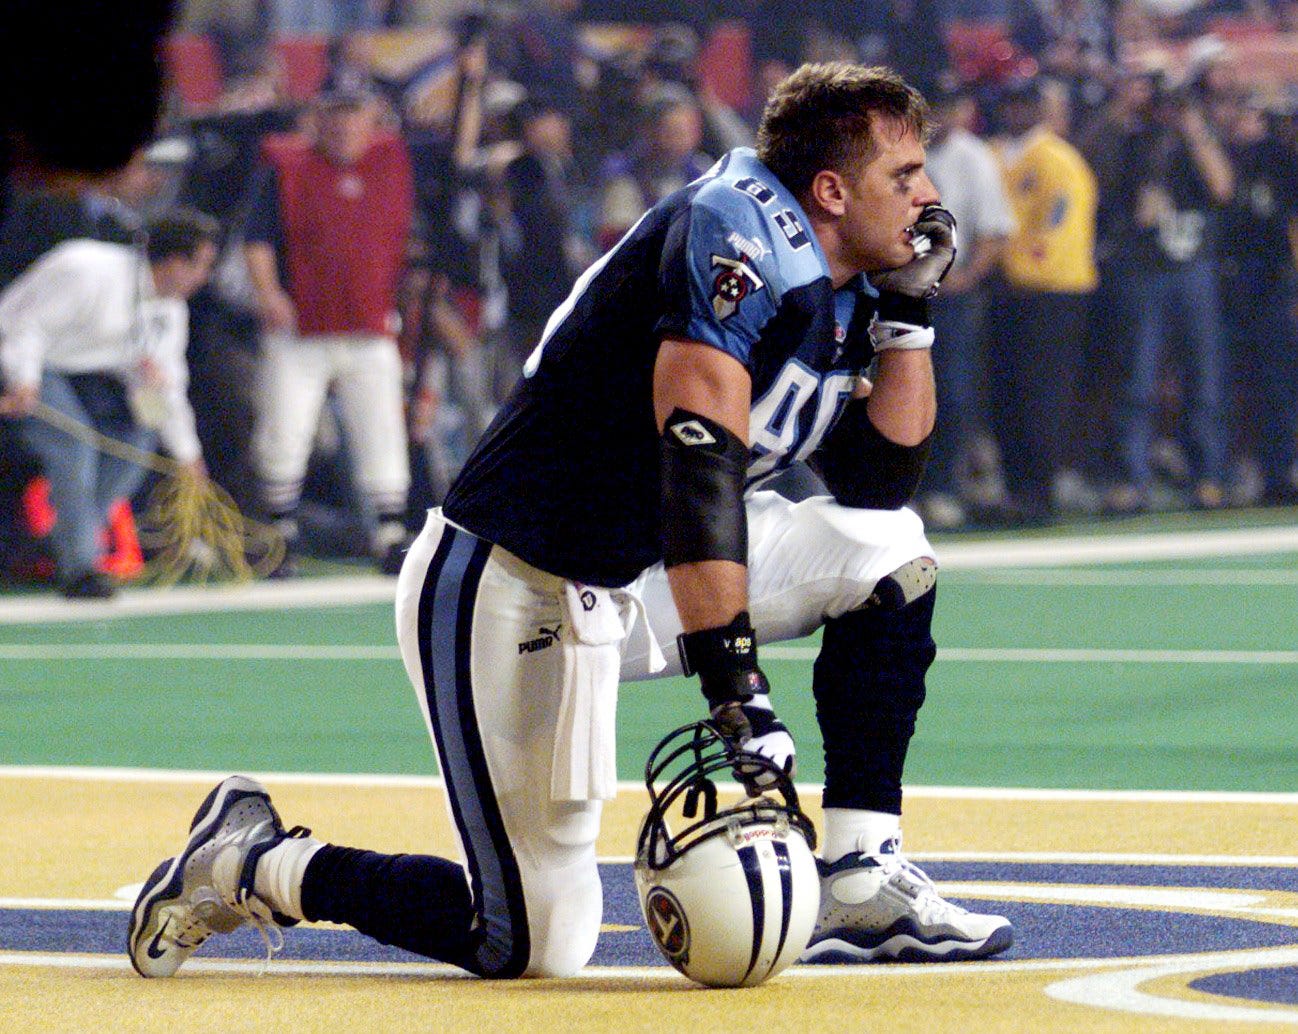 A dejected Frank Wycheck of the Tennessee Titans stares out from the end zone as the St. Louis Rams celebrate their Super Bowl XXXIV victory in Atlanta Jan. 30, 2000. Super Bowl